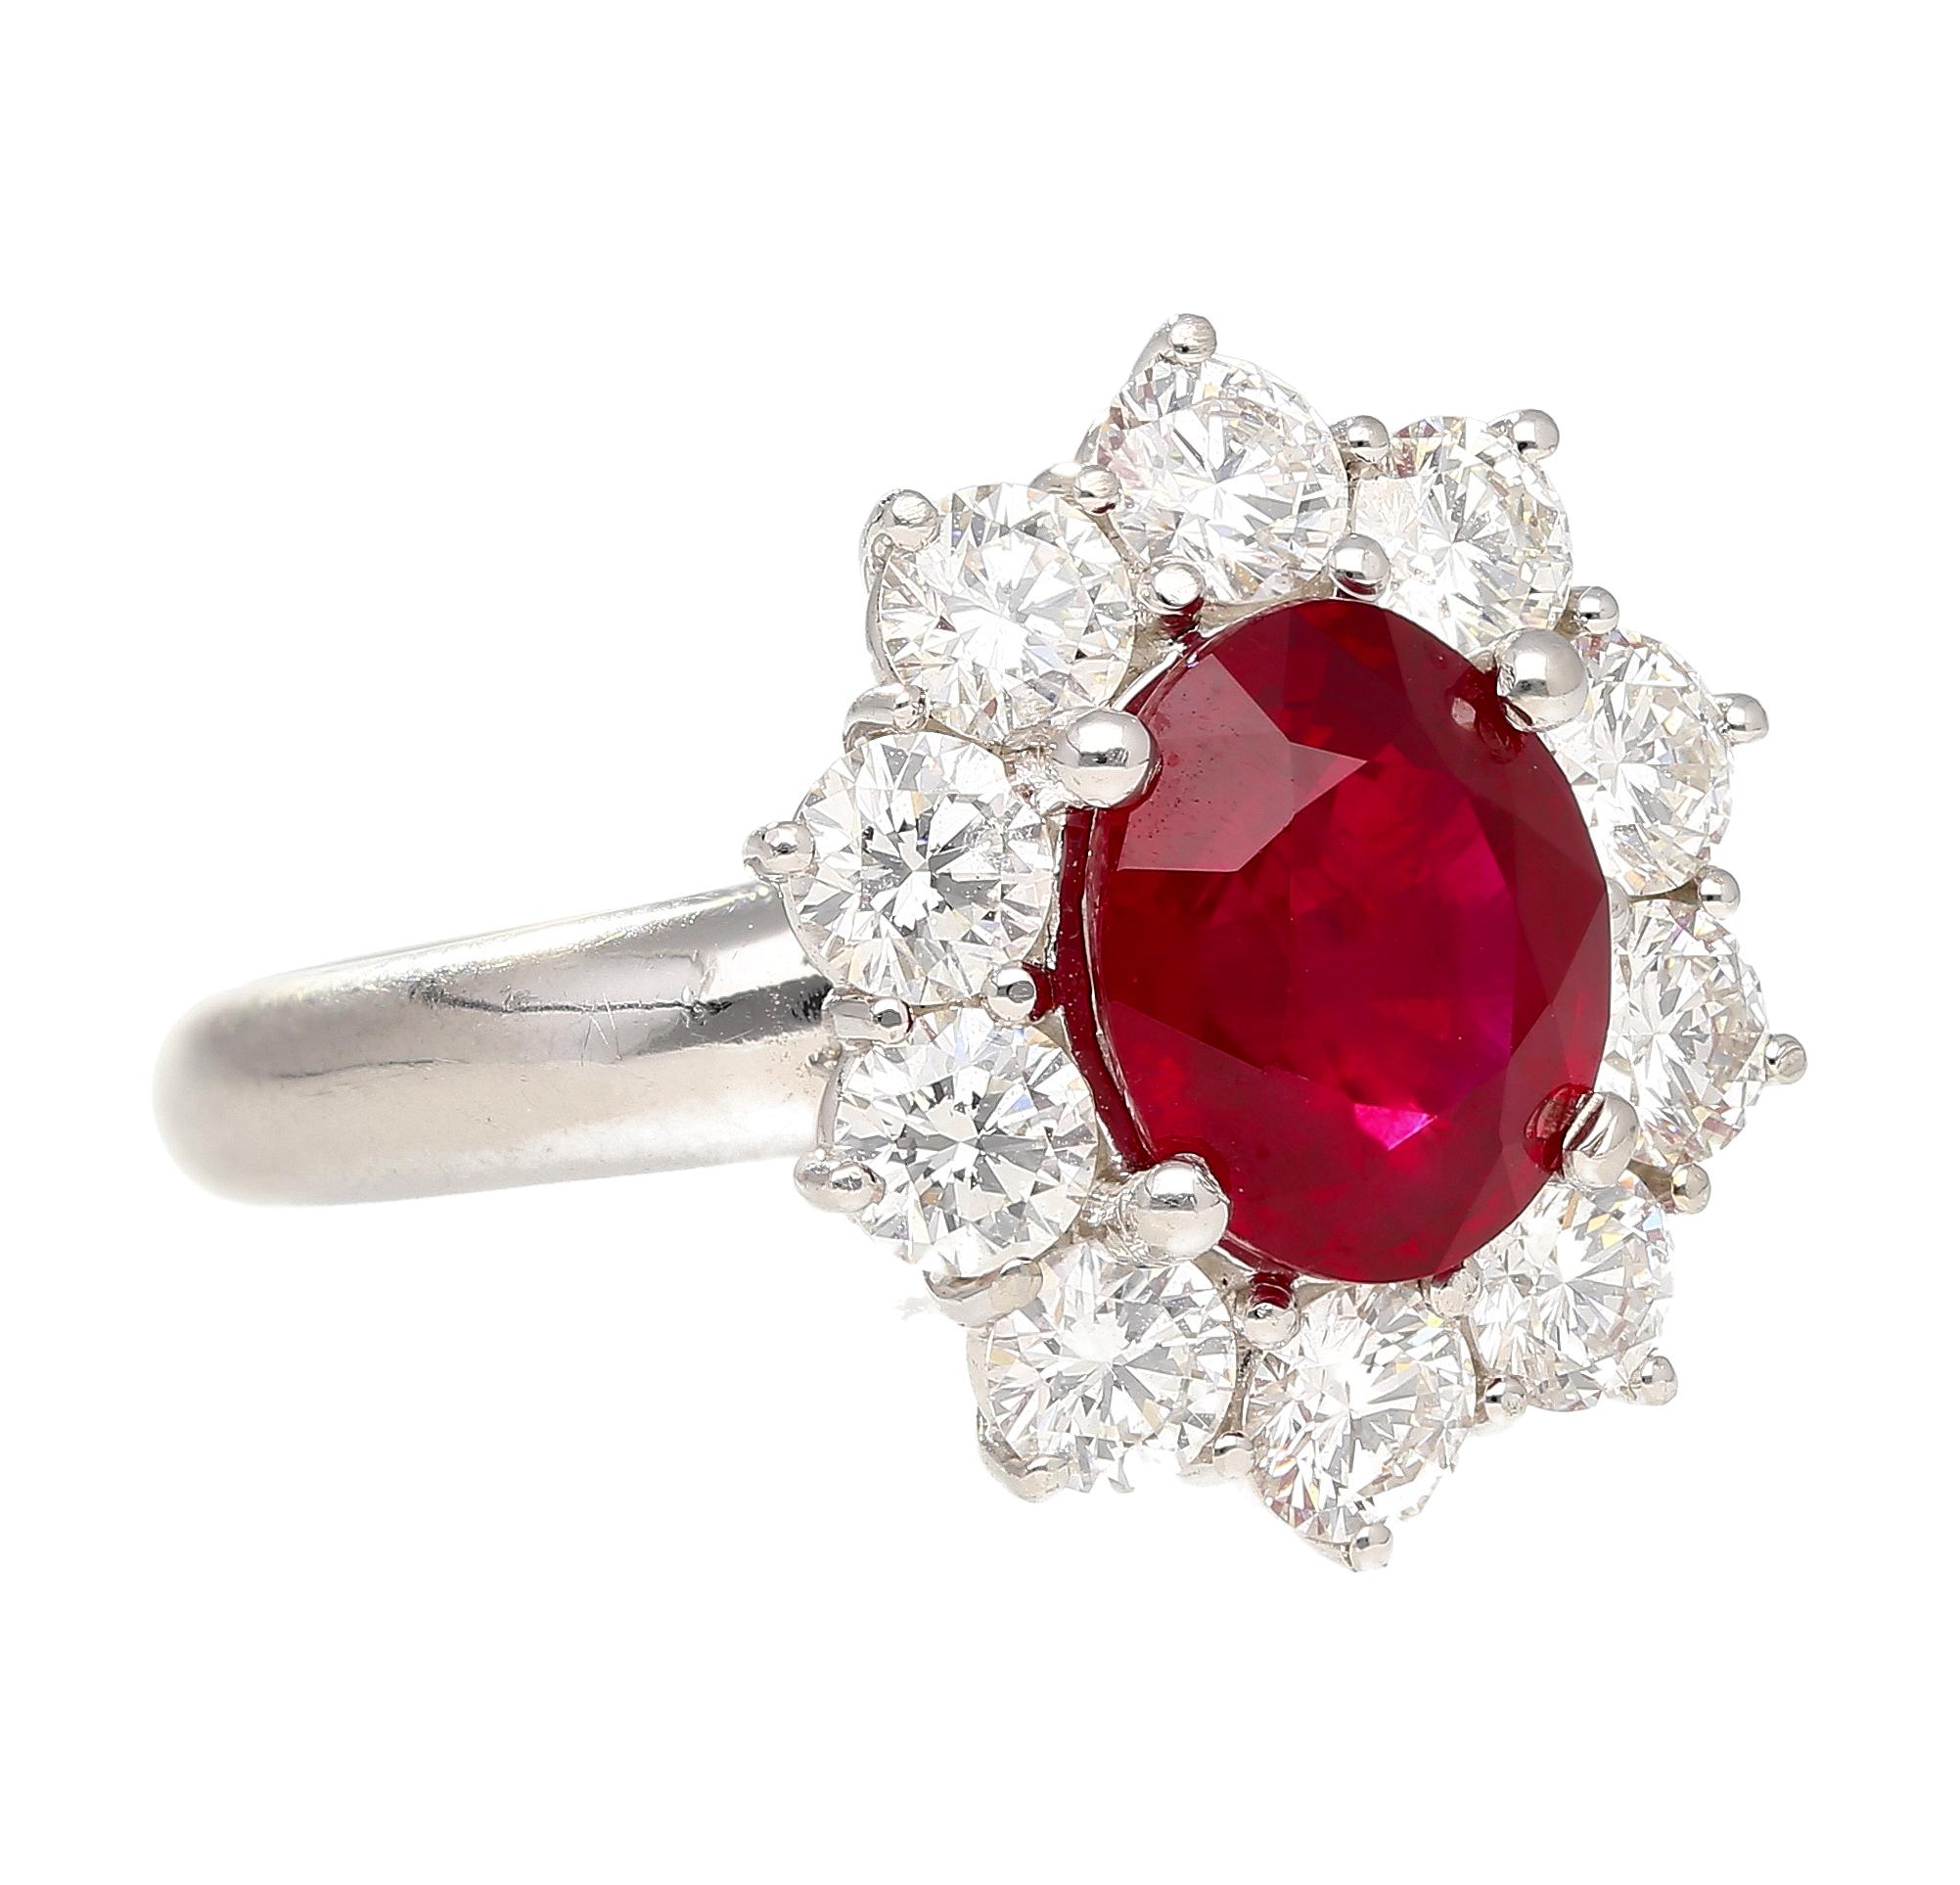 GRS certified 3 carat oval cut Ruby and Diamond halo ring in 18k white gold and platinum. The Ruby is a certified vivid red Pigeons Blood color. This Burma Ruby exhibits a vivid, pure red hue, with a subtle trace of blue, closely resembling the